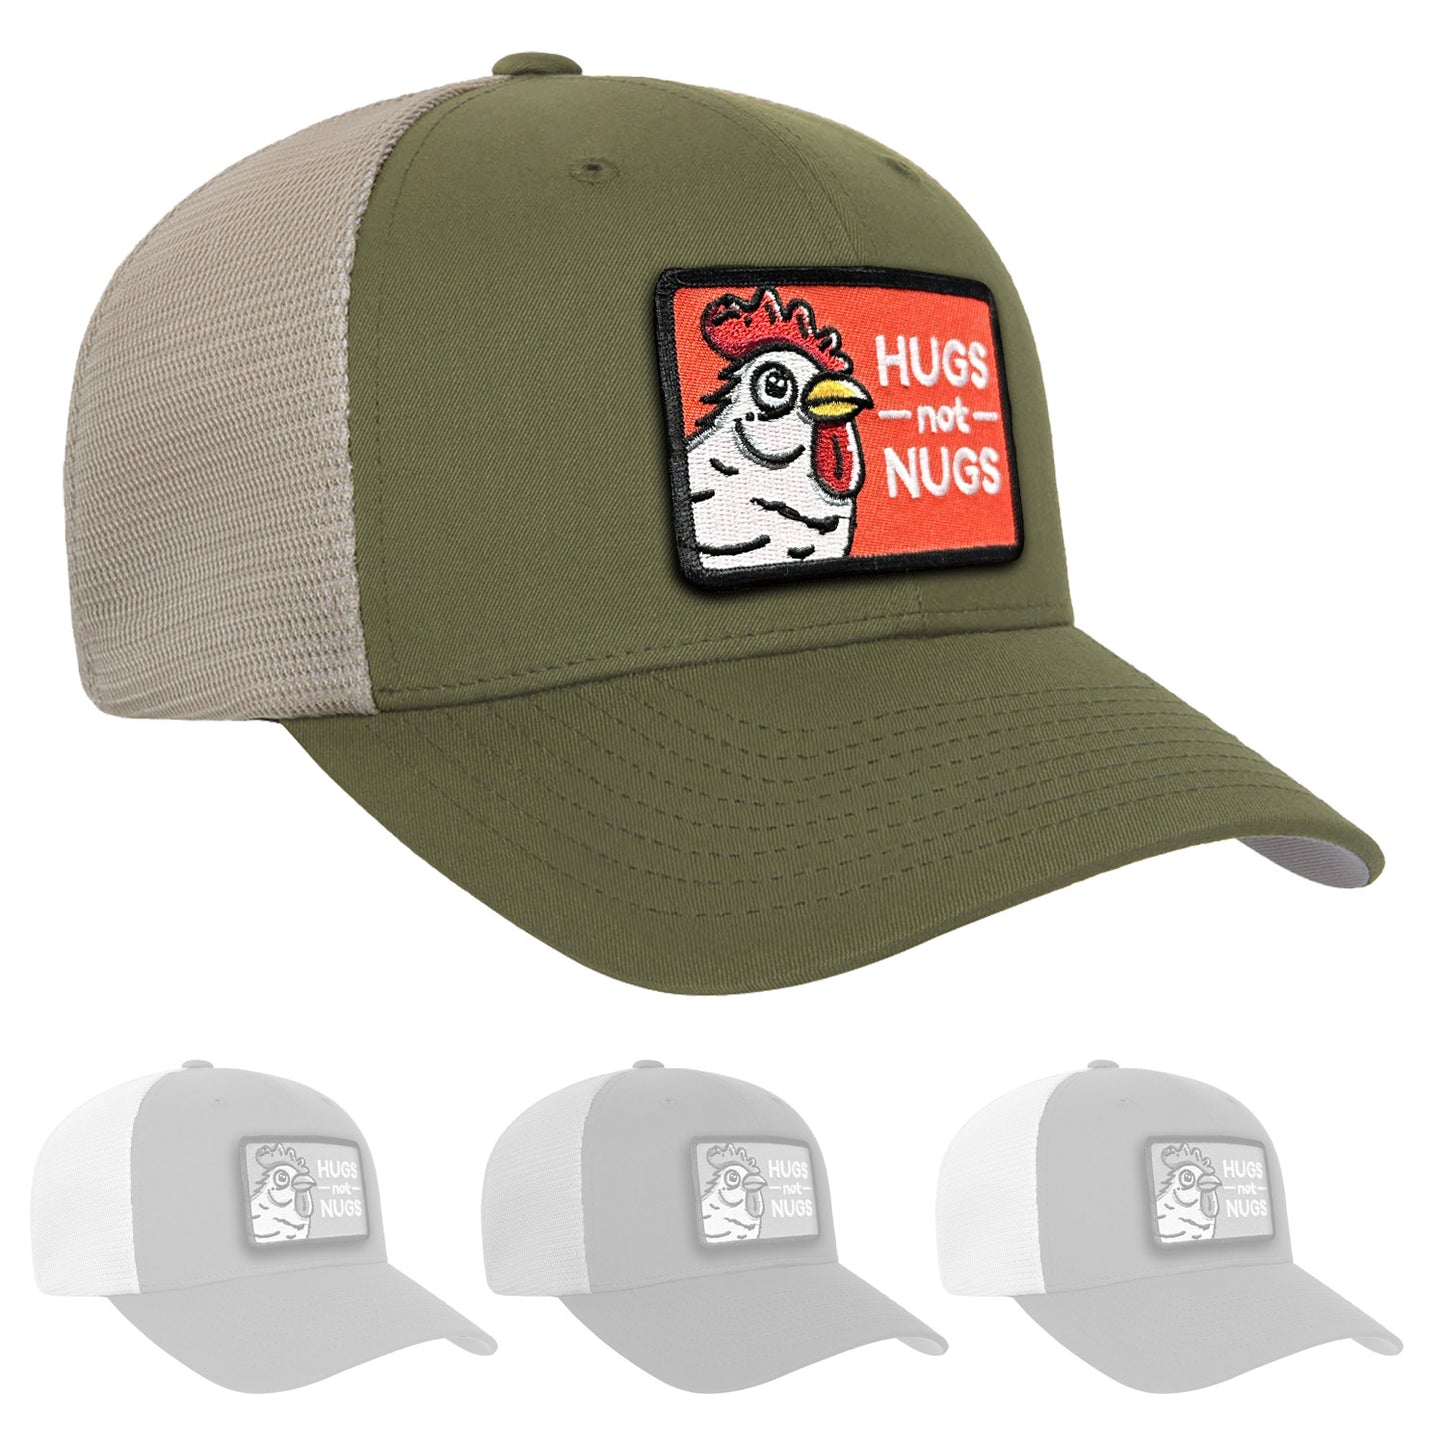 Hugs Not Nugs Flexifit Snap-Back Mesh Hat - Available in 8 Colors